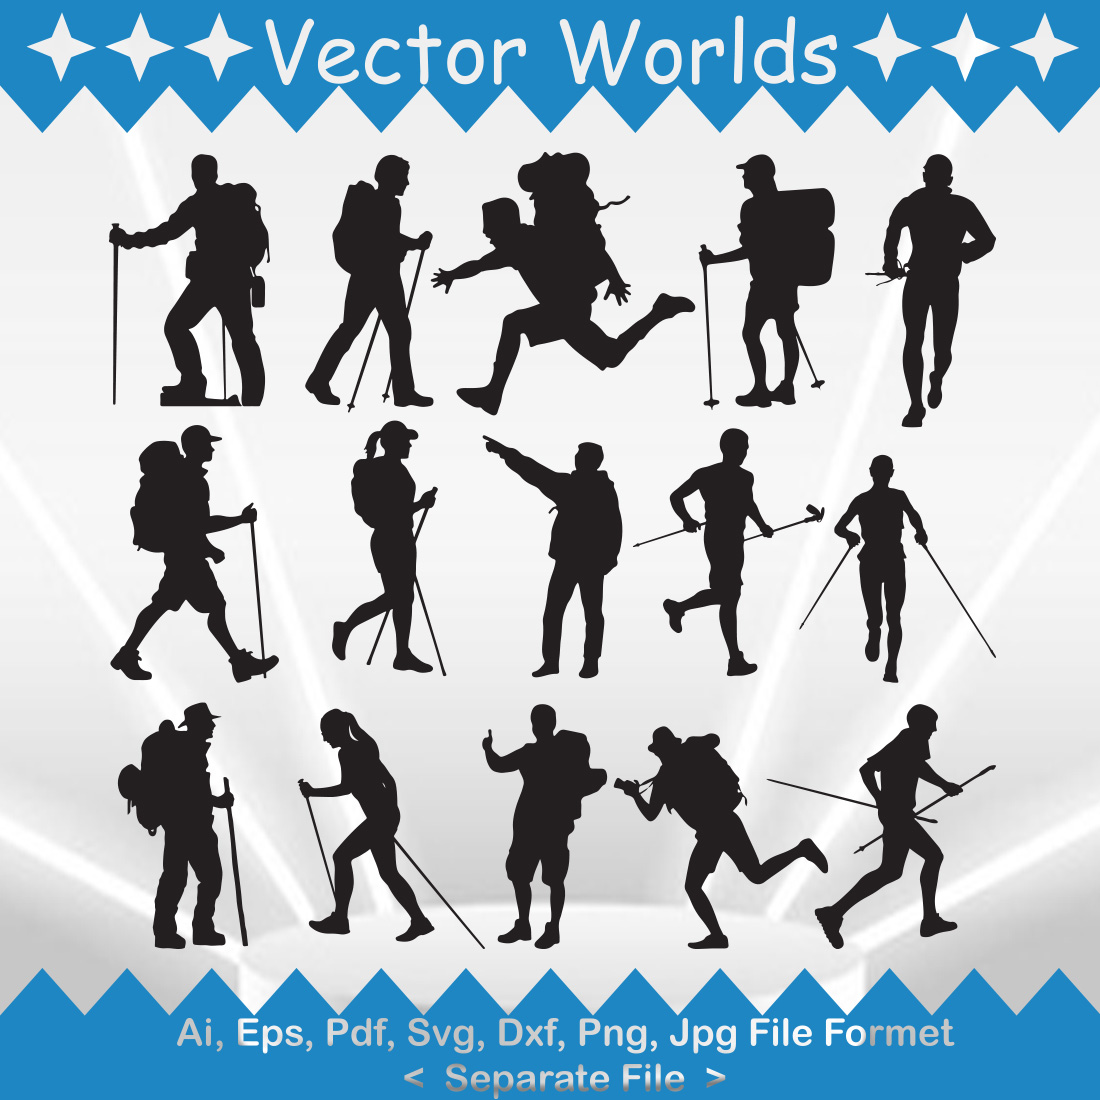 Set of vector irresistible silhouette images of trekking.